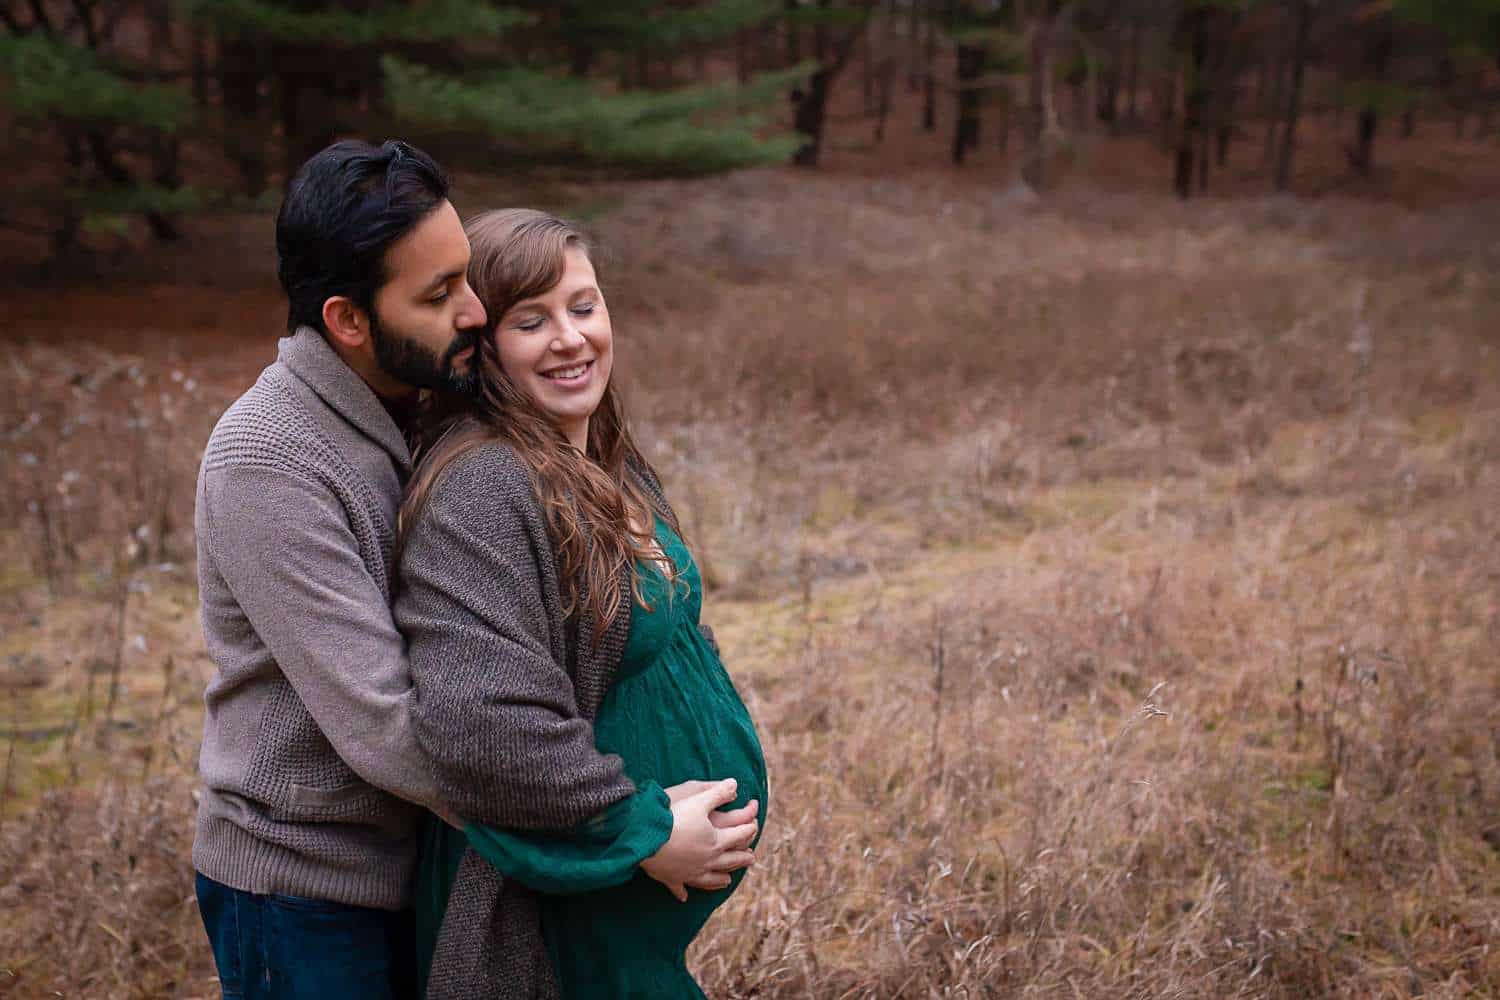 maternity photographer in rochester ny captures sunset maternity portraits of mom to be